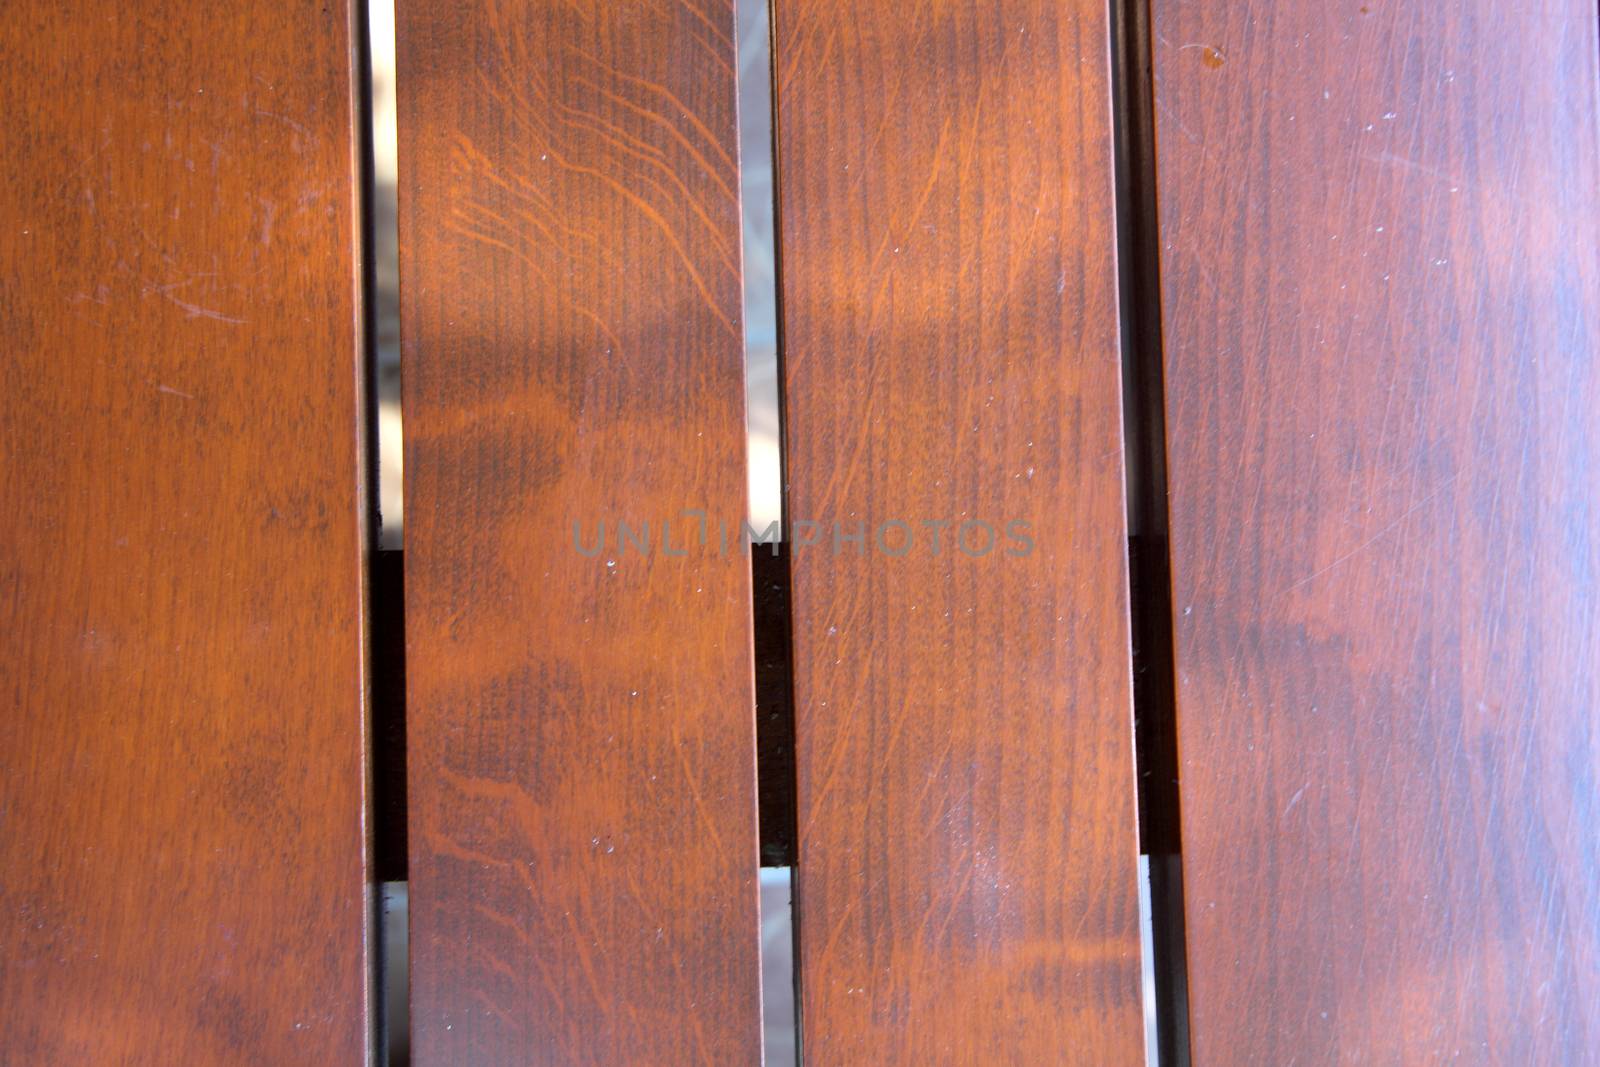 In the photo background of lacquered boards